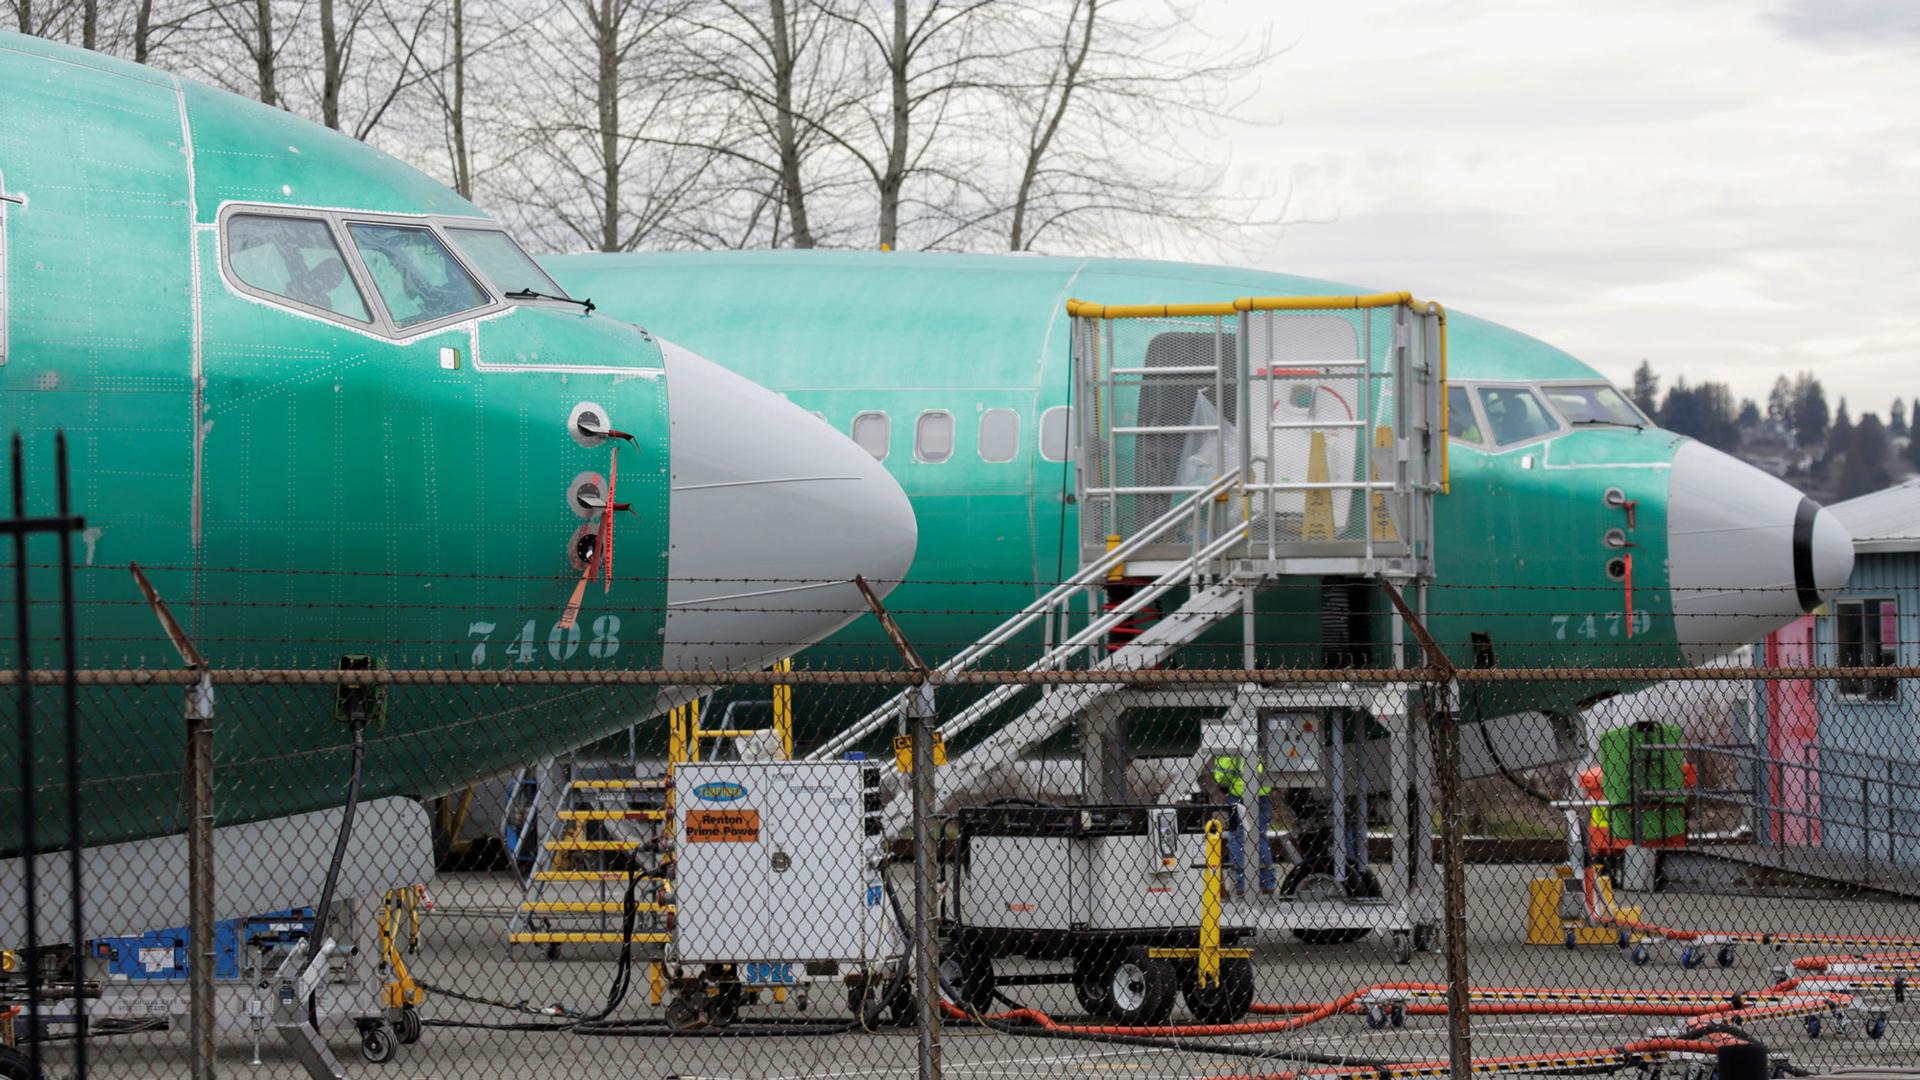 The front end of two Boeing 737 MAX 8 aircraft with a green body and white nose, are parked at a Boeing production facility.